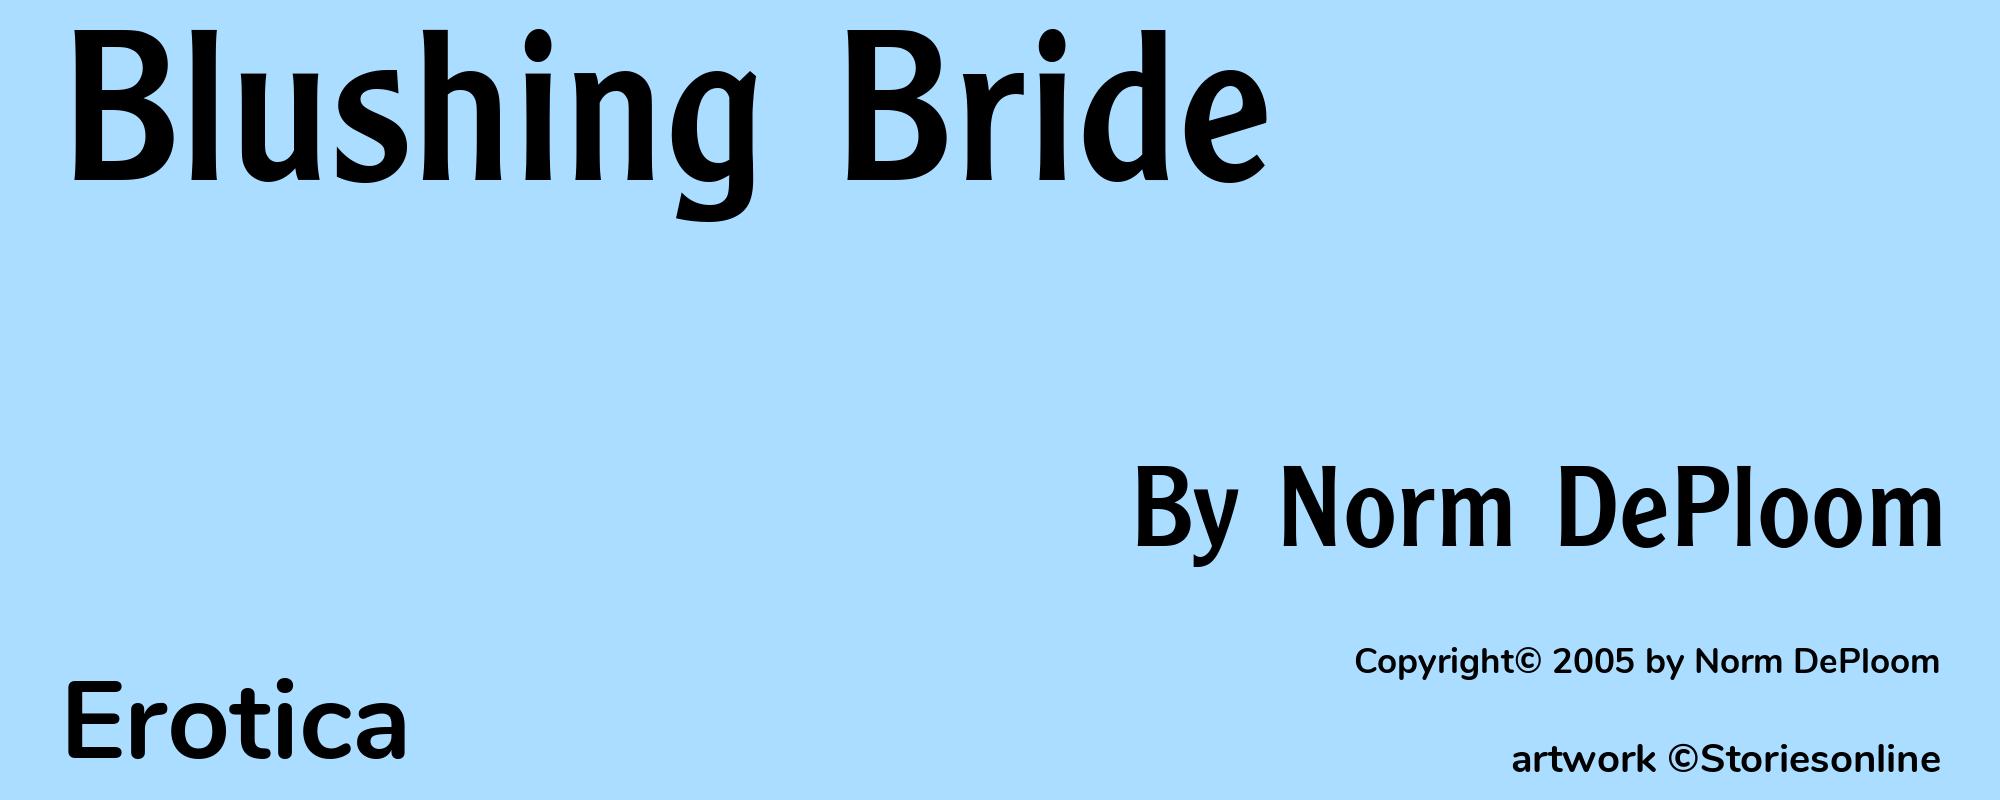 Blushing Bride - Cover